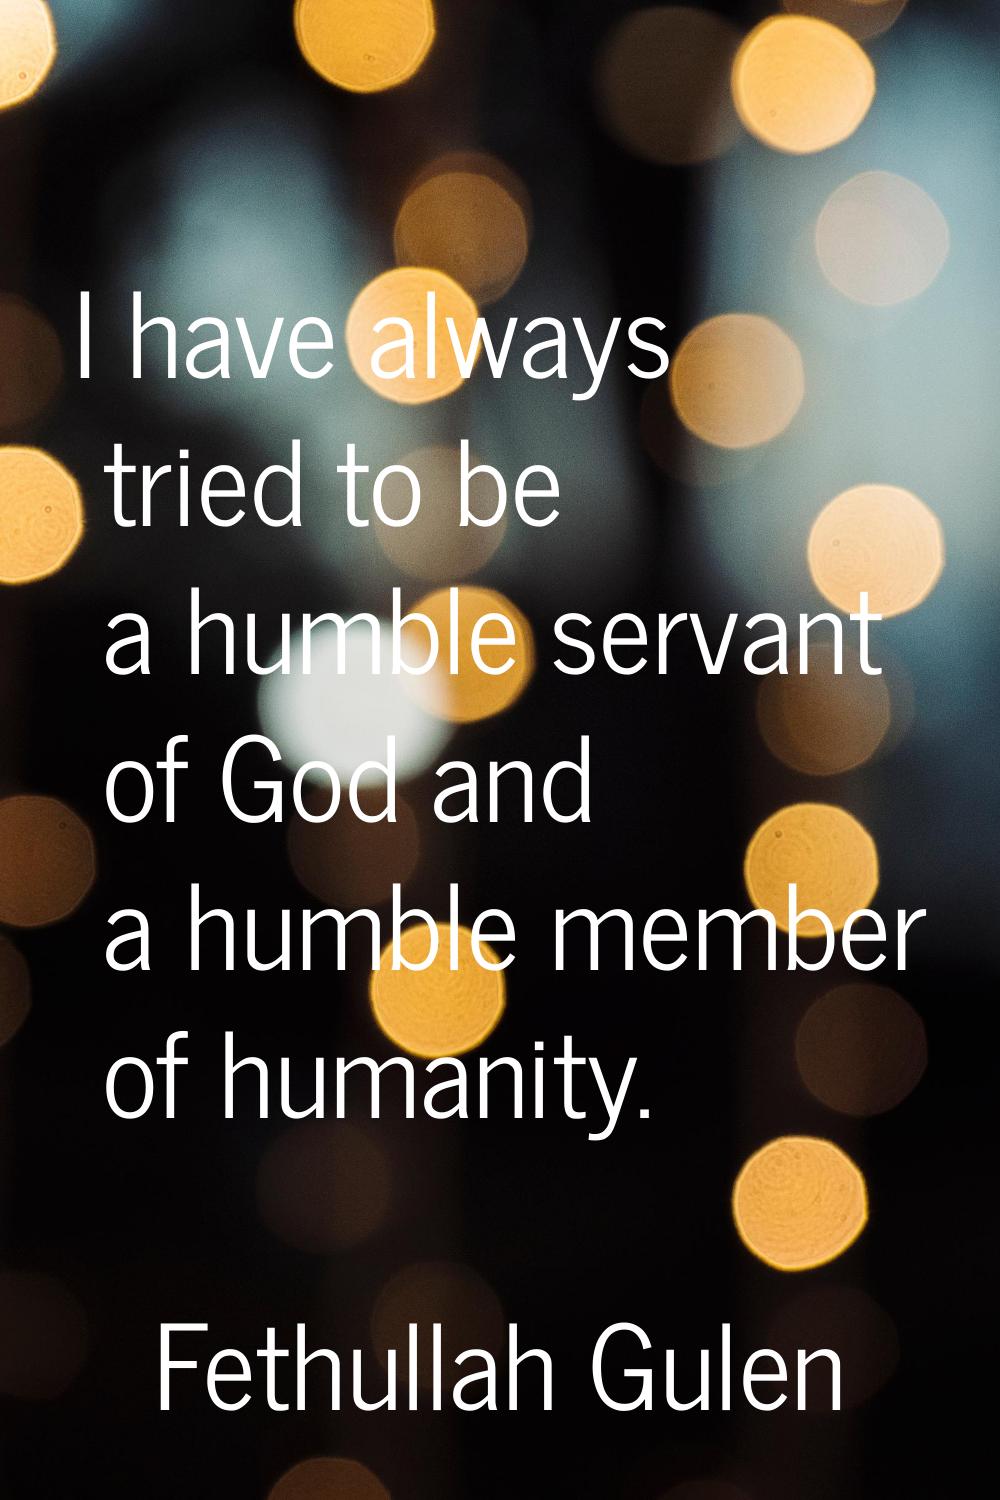 I have always tried to be a humble servant of God and a humble member of humanity.